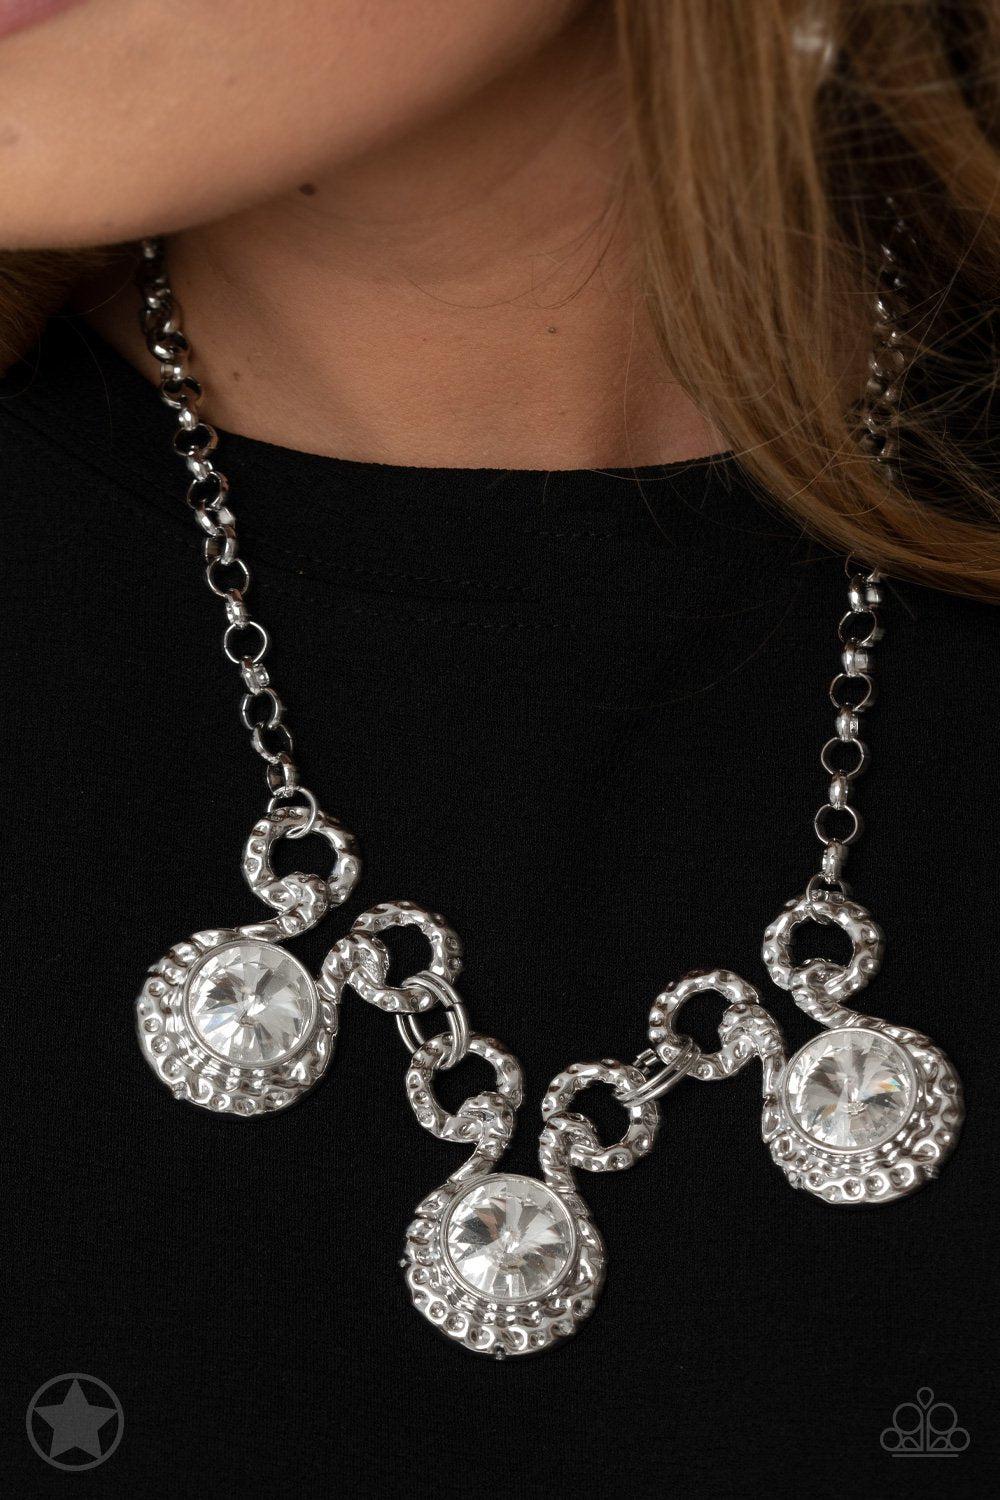 Hypnotized - Silver and White Rhinestone Necklace and matching Earrings - Paparazzi Accessories - lightbox -CarasShop.com - $5 Jewelry by Cara Jewels